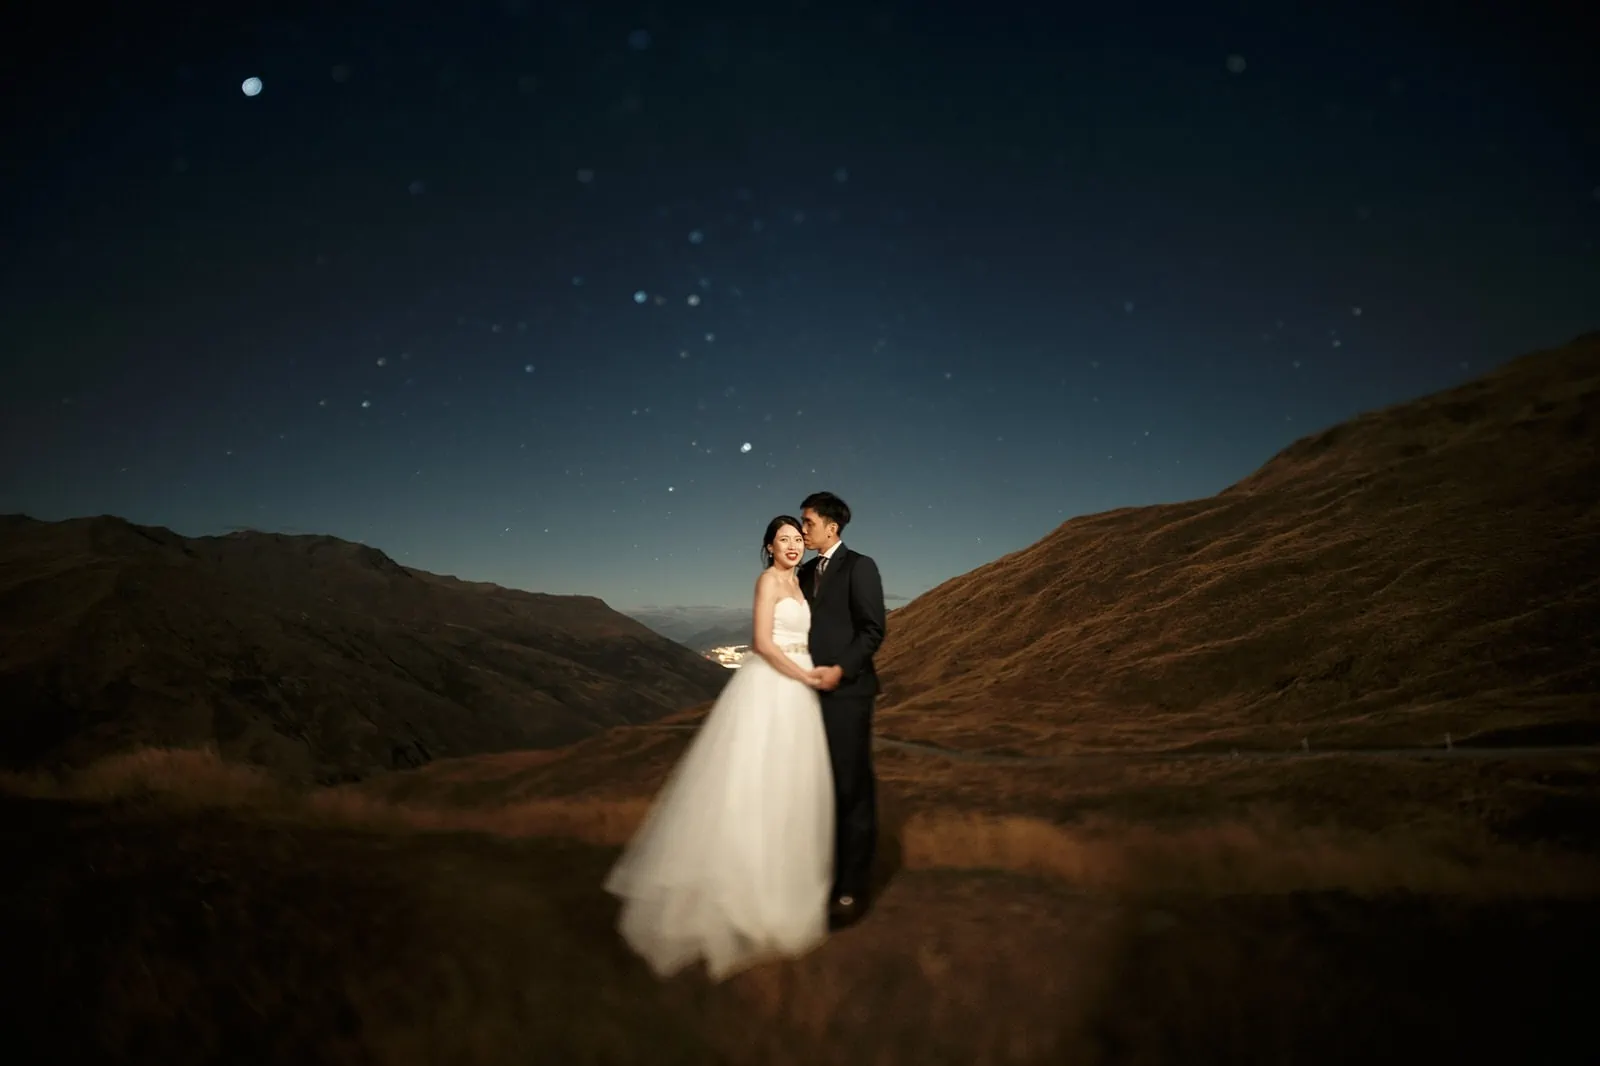 Queenstown New Zealand Elopement Wedding Photographer - A bride and groom posing for a picturesque starry night shoot, showcasing our portfolio of enchanting nighttime wedding photographs.